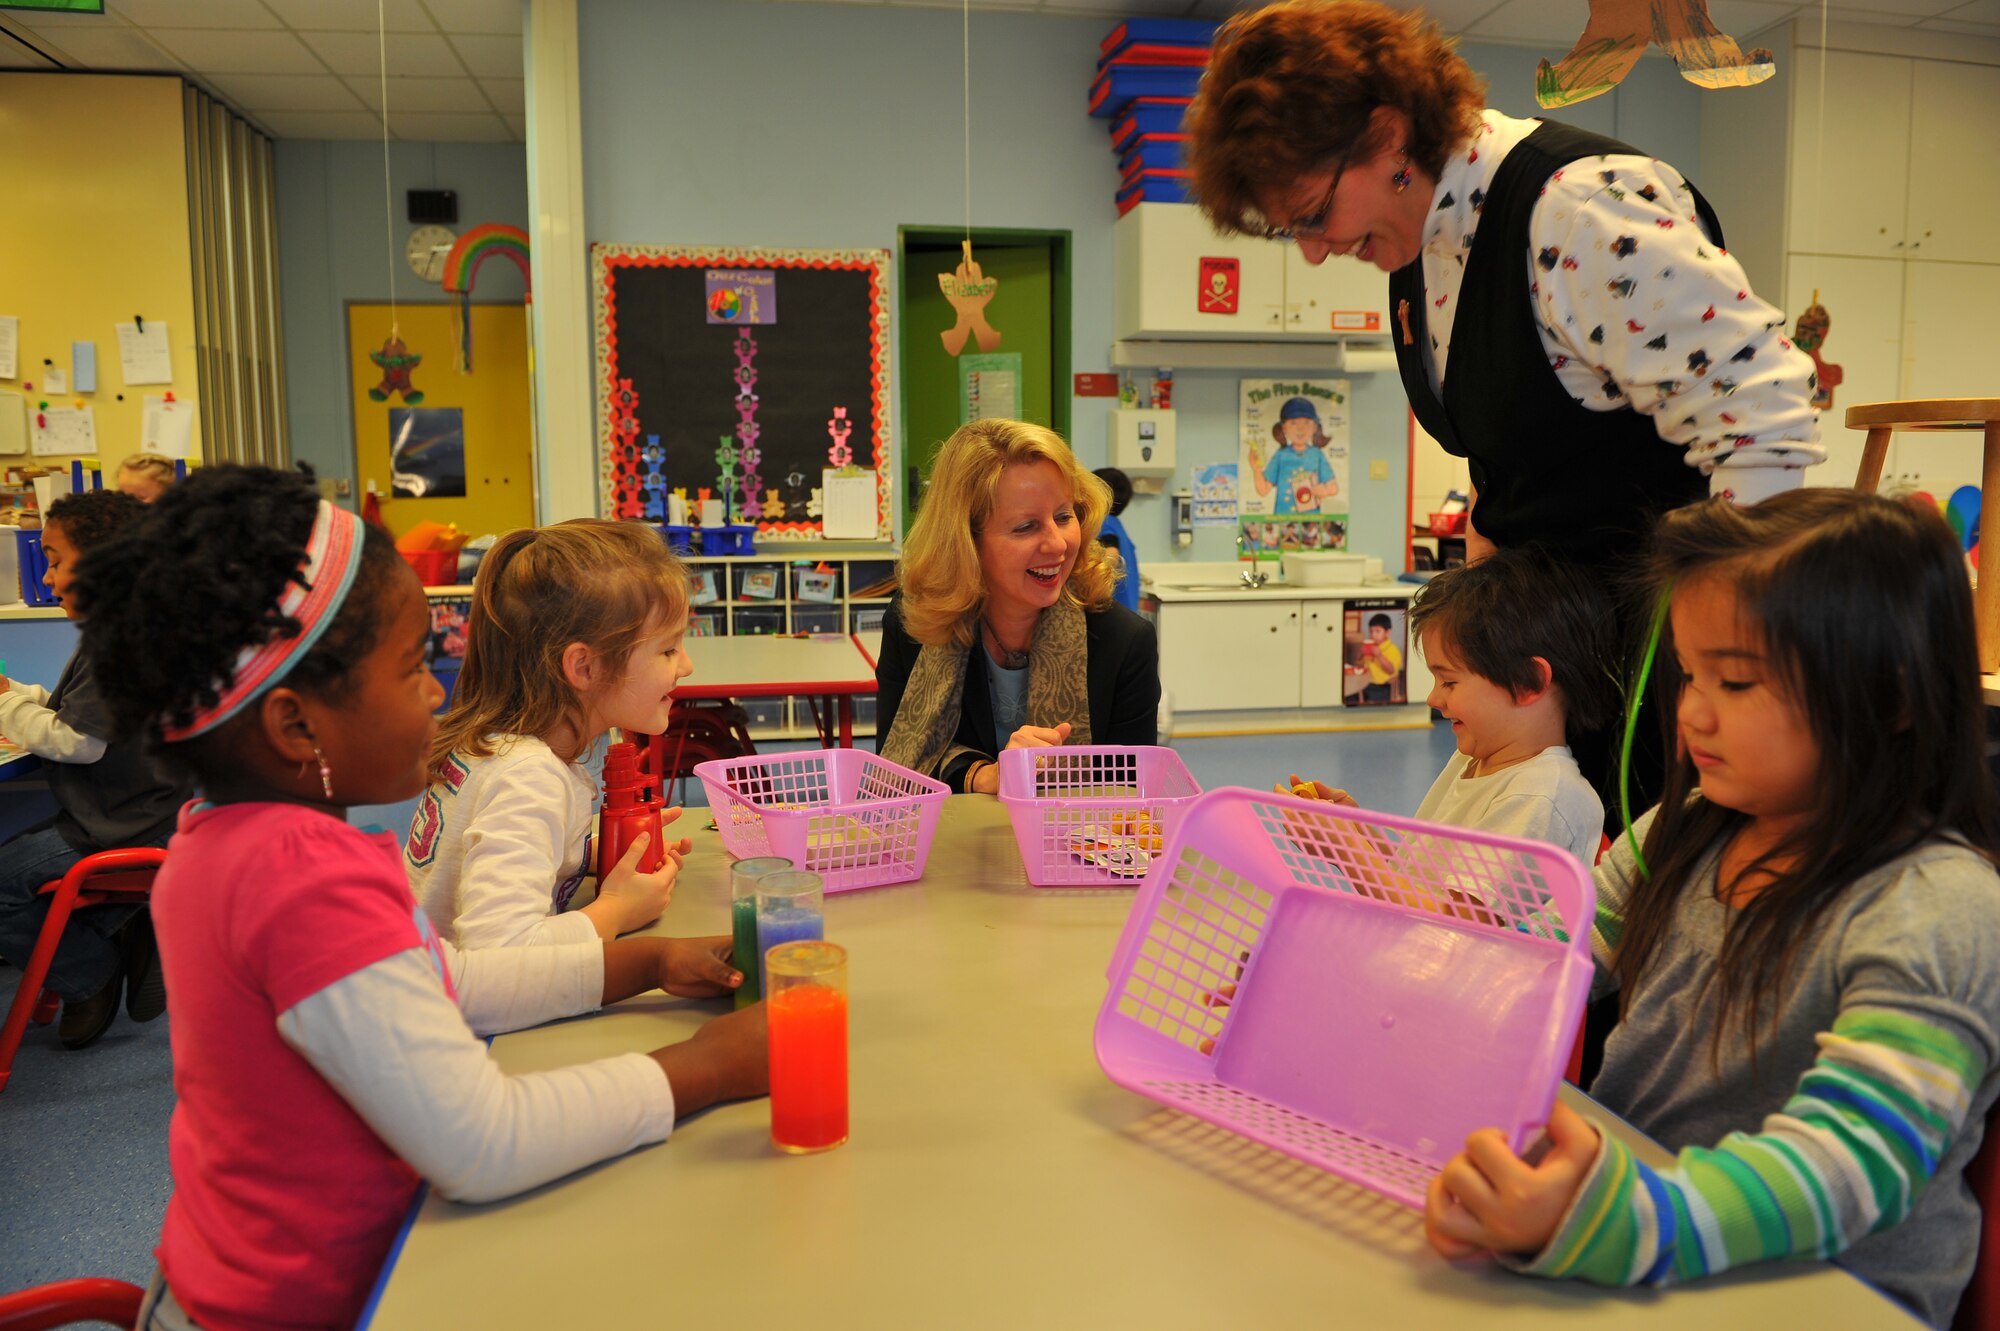 SPANGDAHLEM AIR BASE, Germany – Laura Stavridis, center, wife of U.S. Navy Adm. Jim Stavridis, U.S. European Command commander and Supreme Allied Commander Europe, visits with students enrolled in Spangdahlem Elementary School’s Sure Start program with teacher Sharon Bays during a familiarization tour here Dec. 14. The Sure Start program is modeled after the Head Start program implemented for children needing more time and attention to achieve school readiness. Sure Start is a preschool program that serves military families and their childeren living overseas. (U.S. Air Force photo/Tech. Sgt. Jonathan Pomeroy)